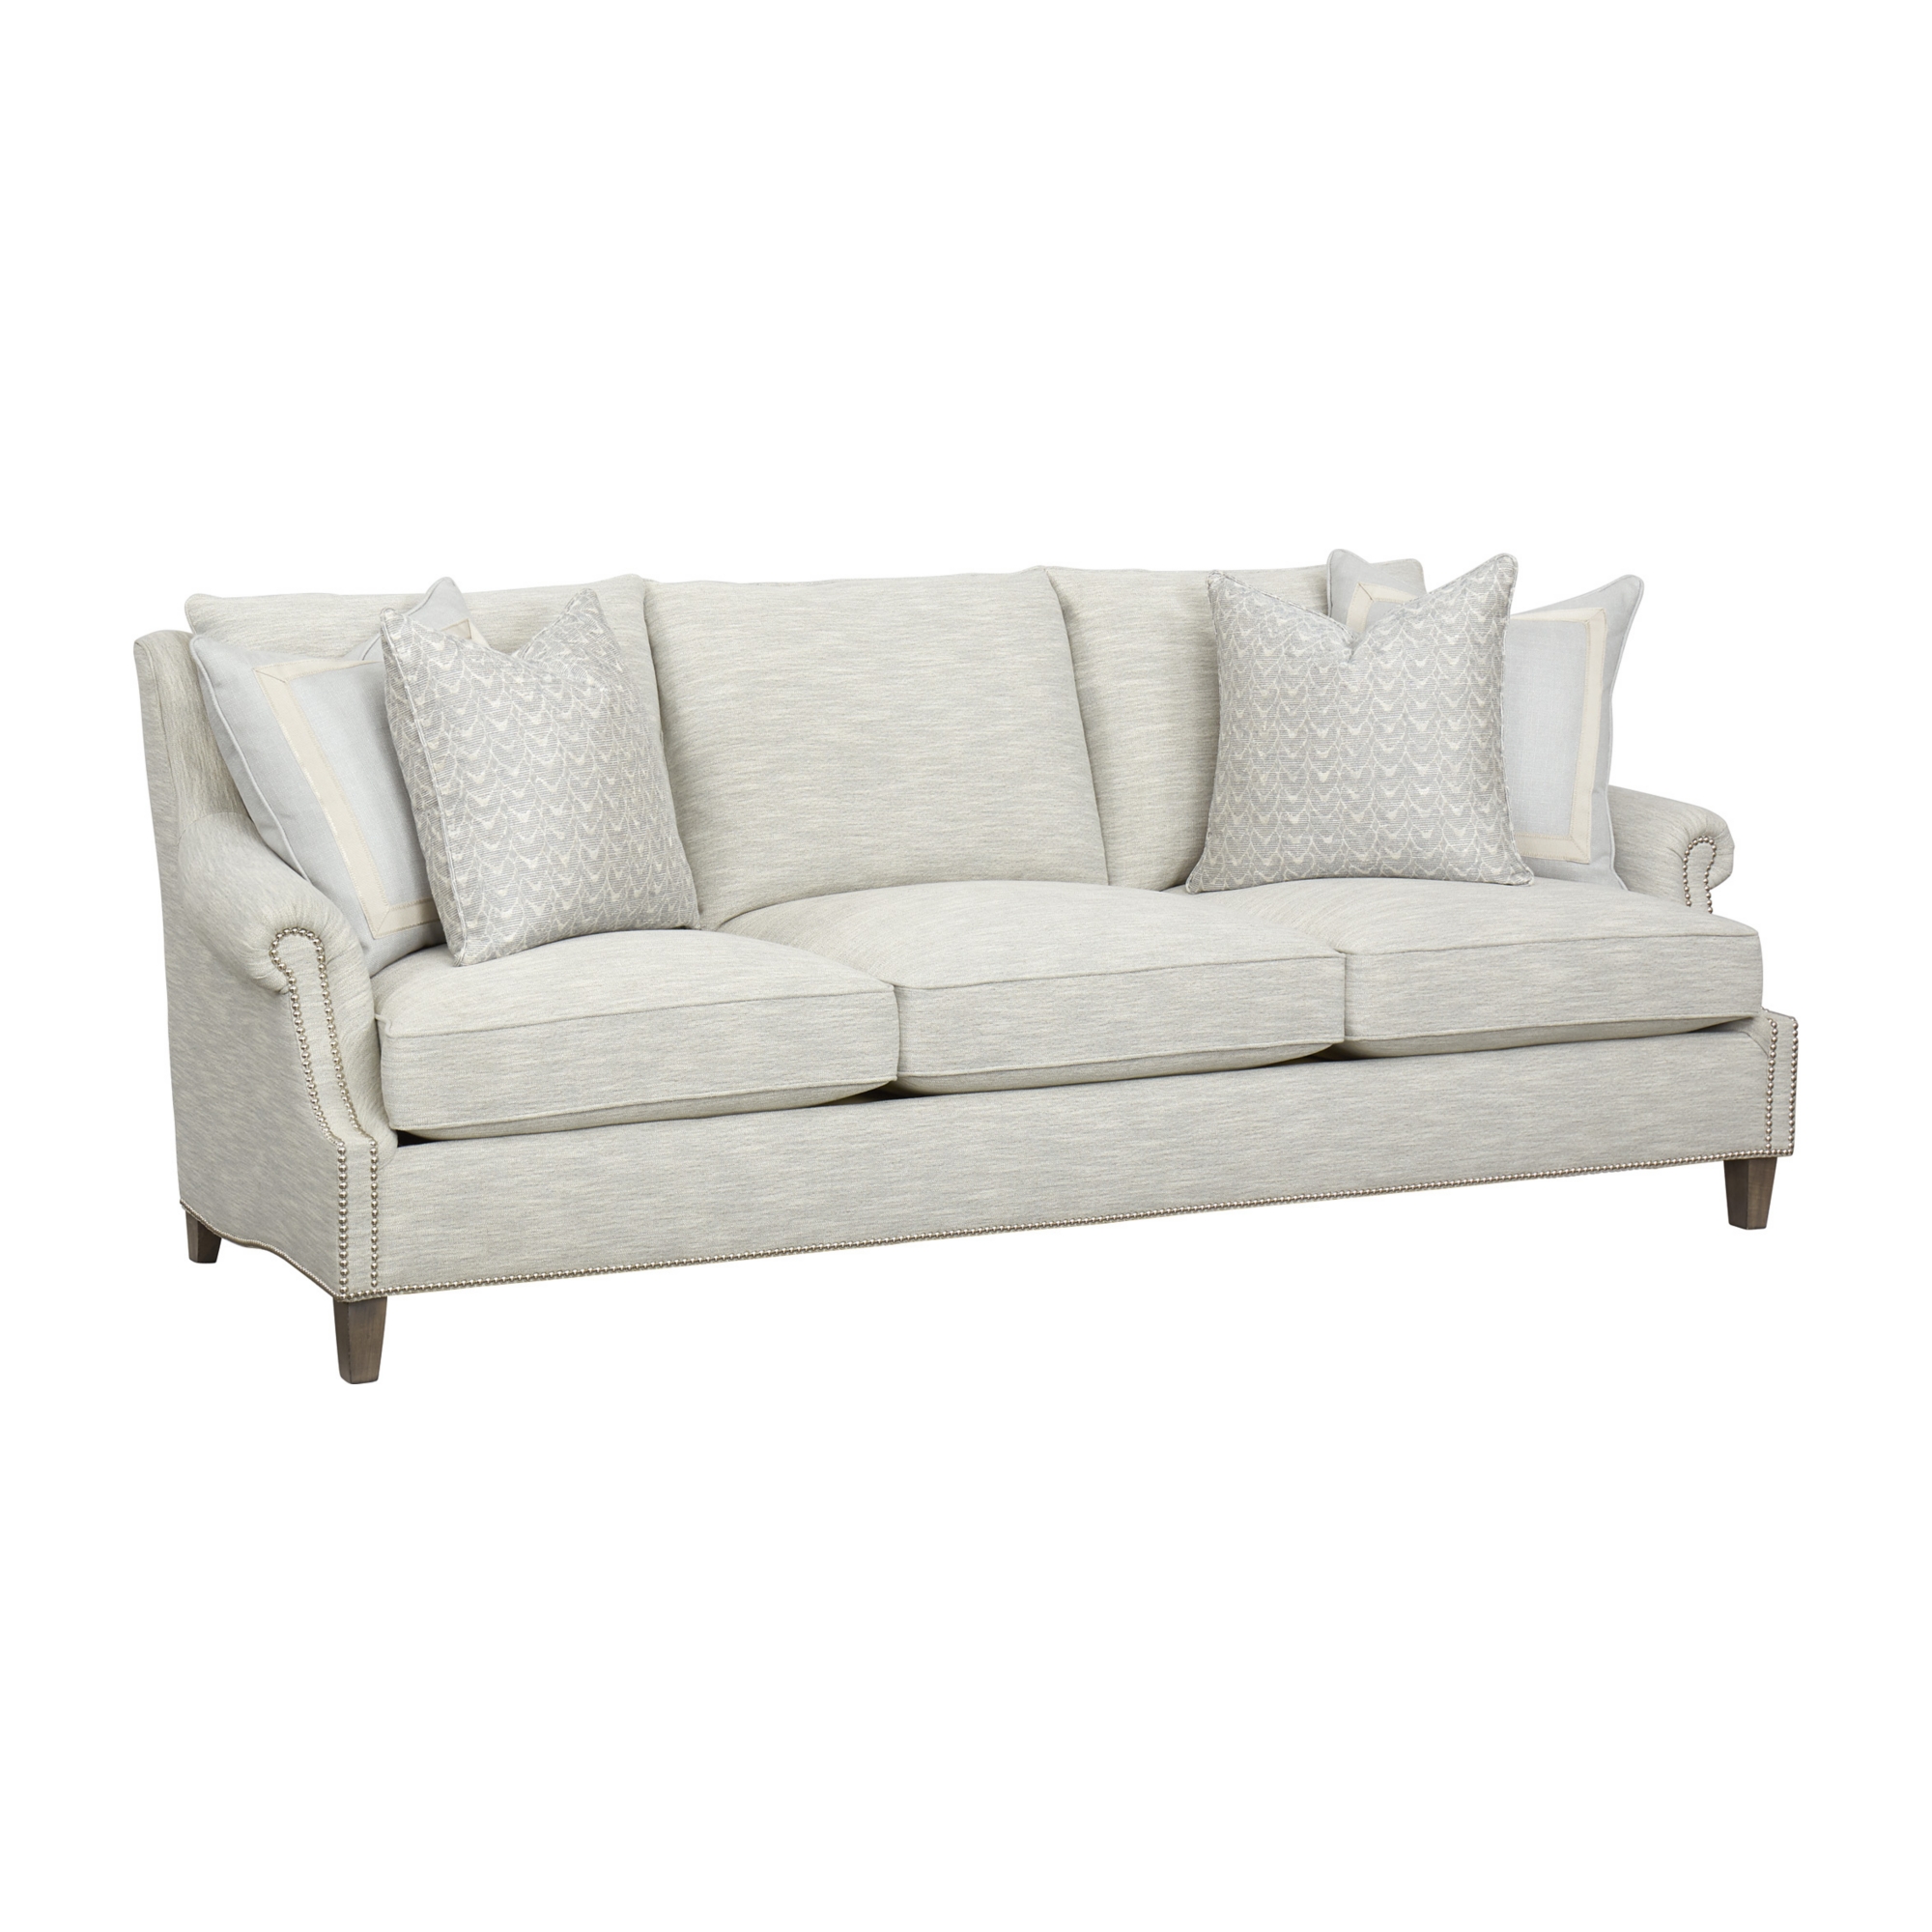 Brie Sofa Find The Perfect Style Havertys